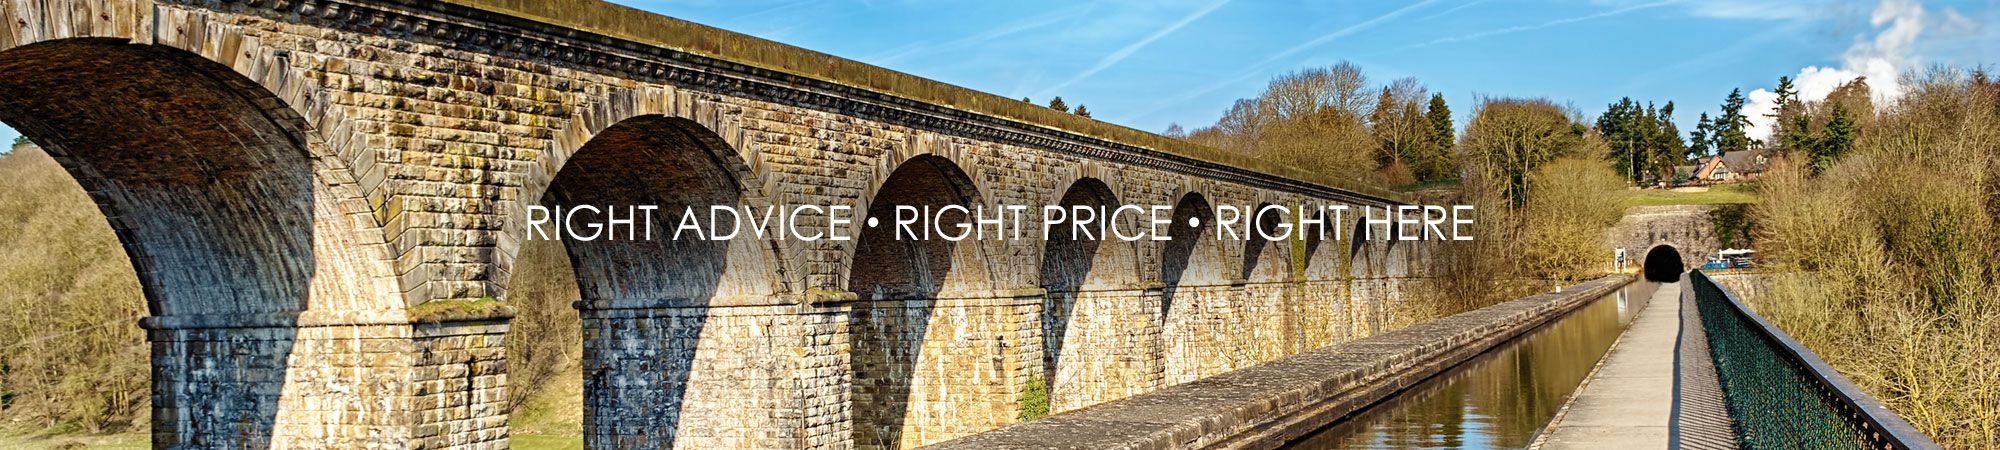 Right Advice • Right Price • Right Here tagline with Wrexham and North Wales scenery backdrop